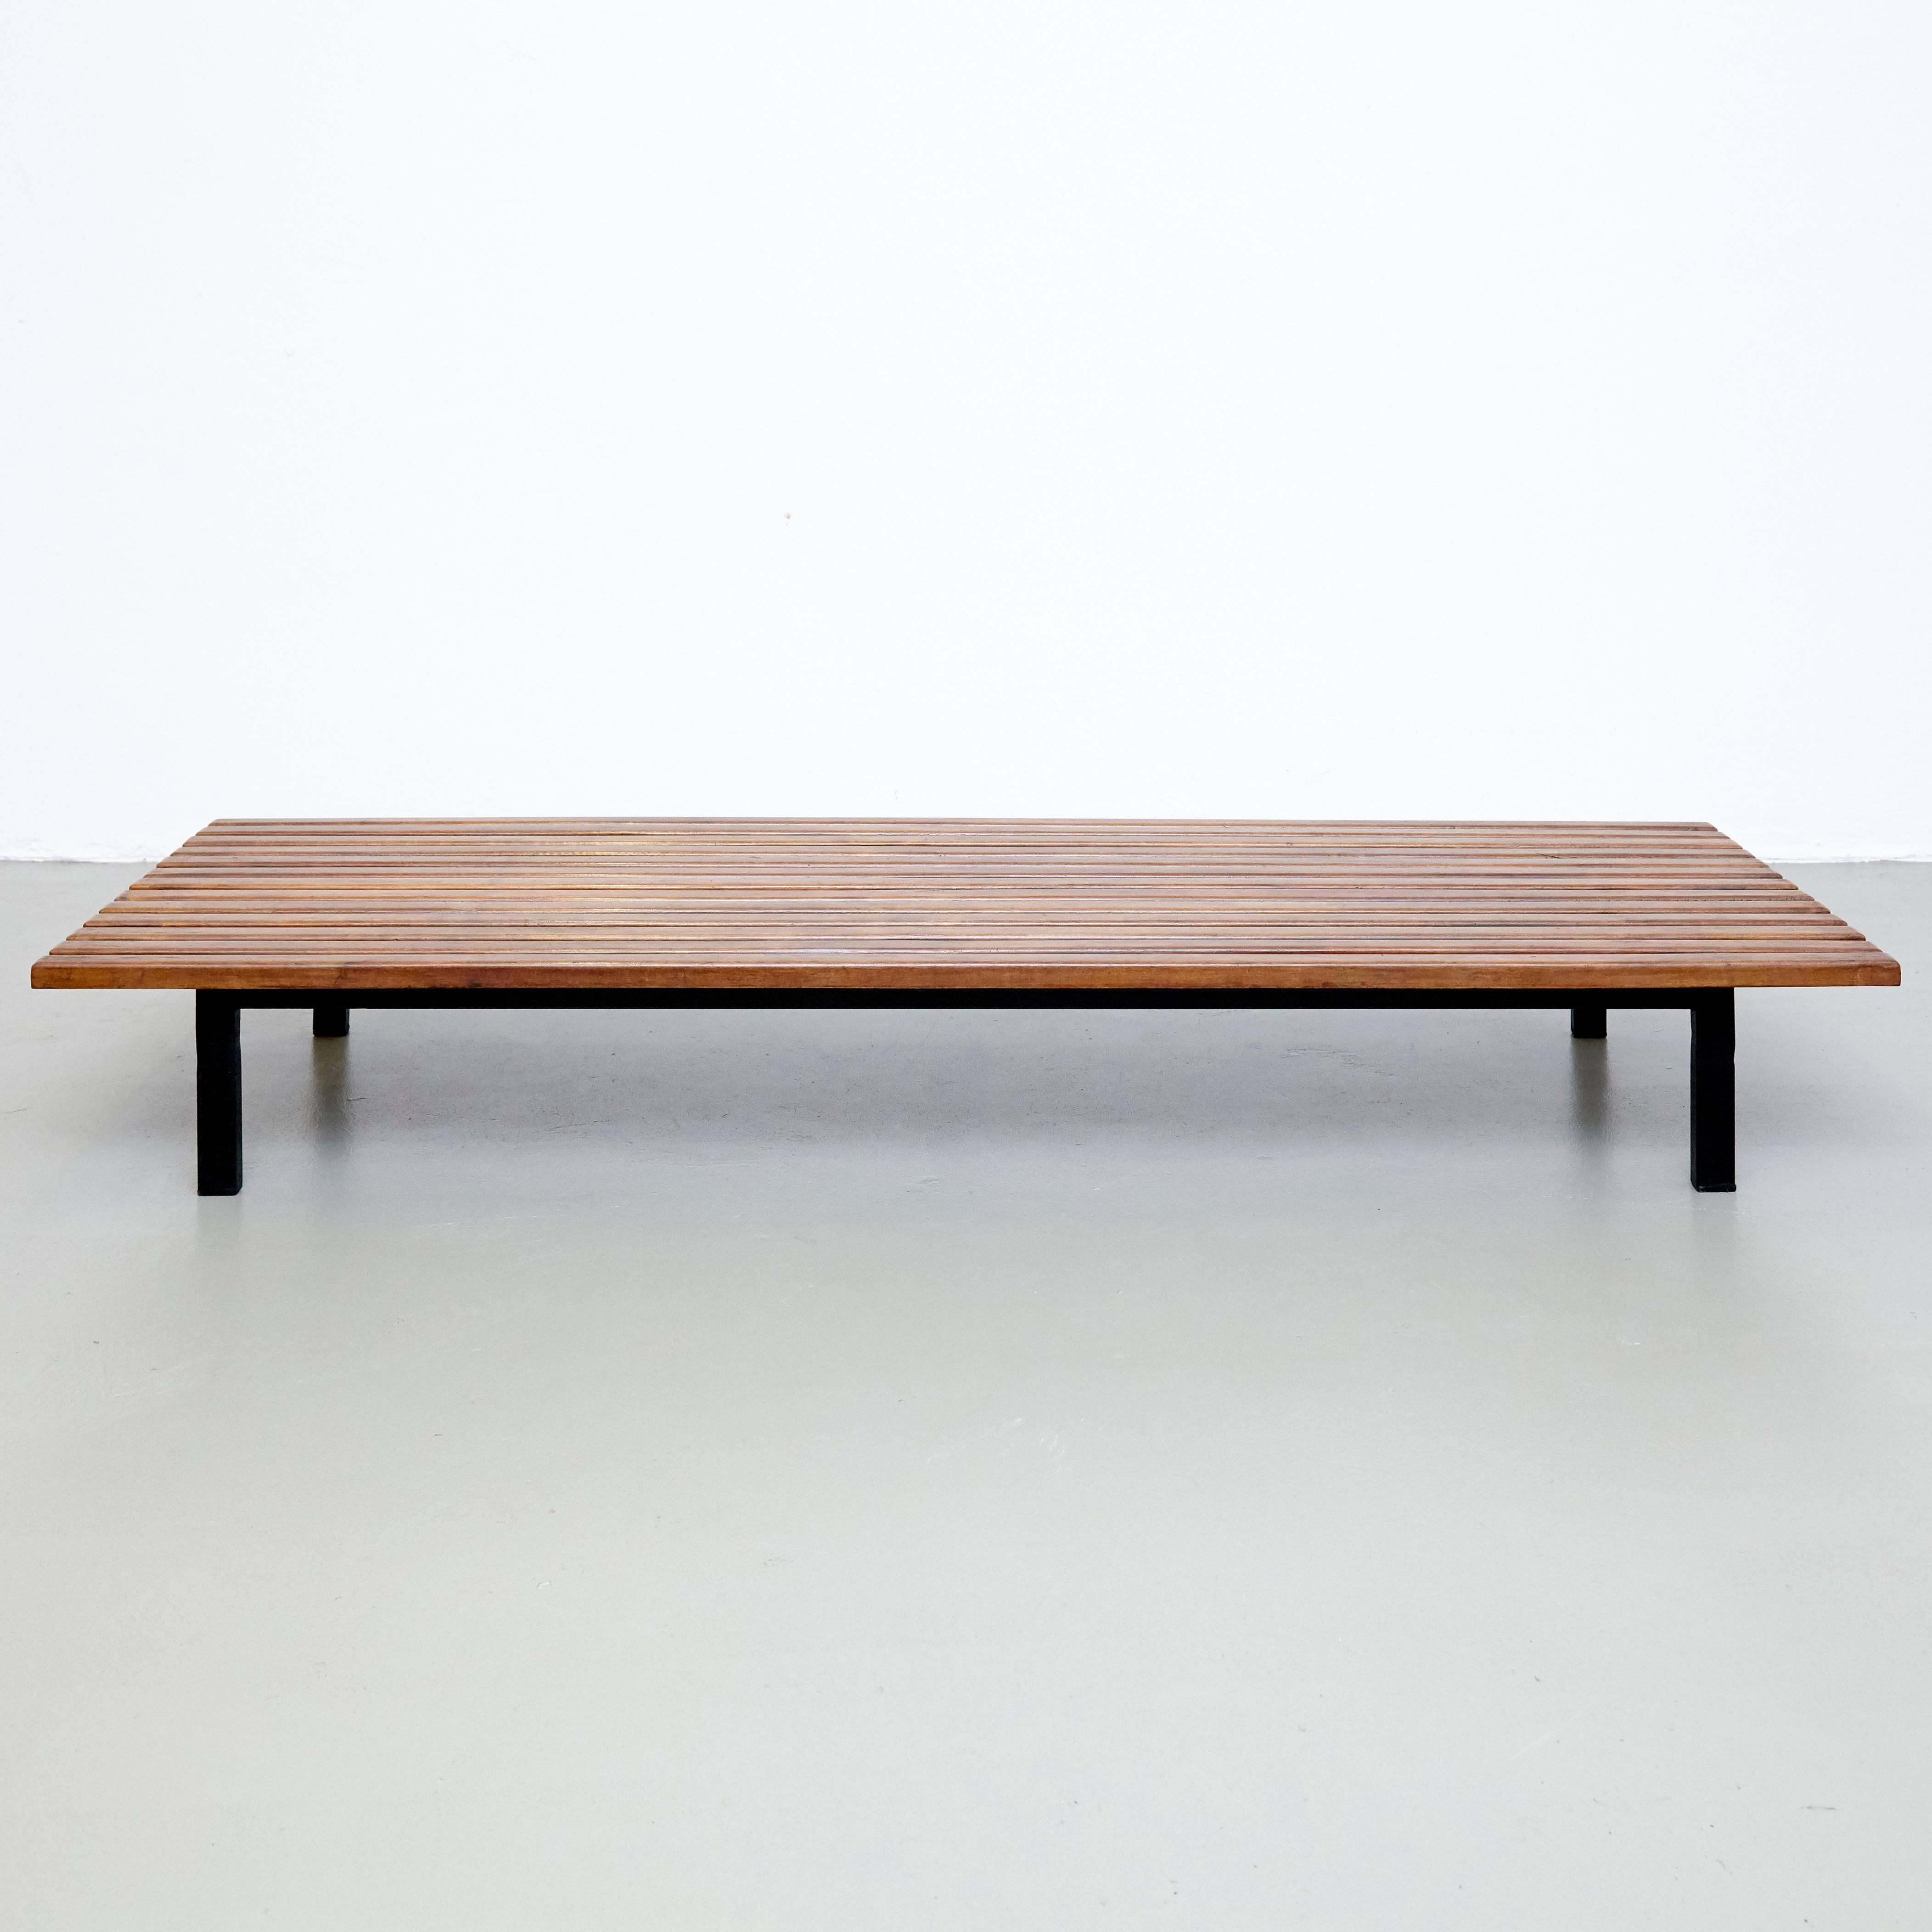 Bench designed by Charlotte Perriand, circa 1950.
Manufactured by Steph Simon (France), circa 1950.
Wood, lacquered metal frame and legs.

Provenance: Cansado, Mauritania (Africa).

In good original condition, with minor wear consistent with